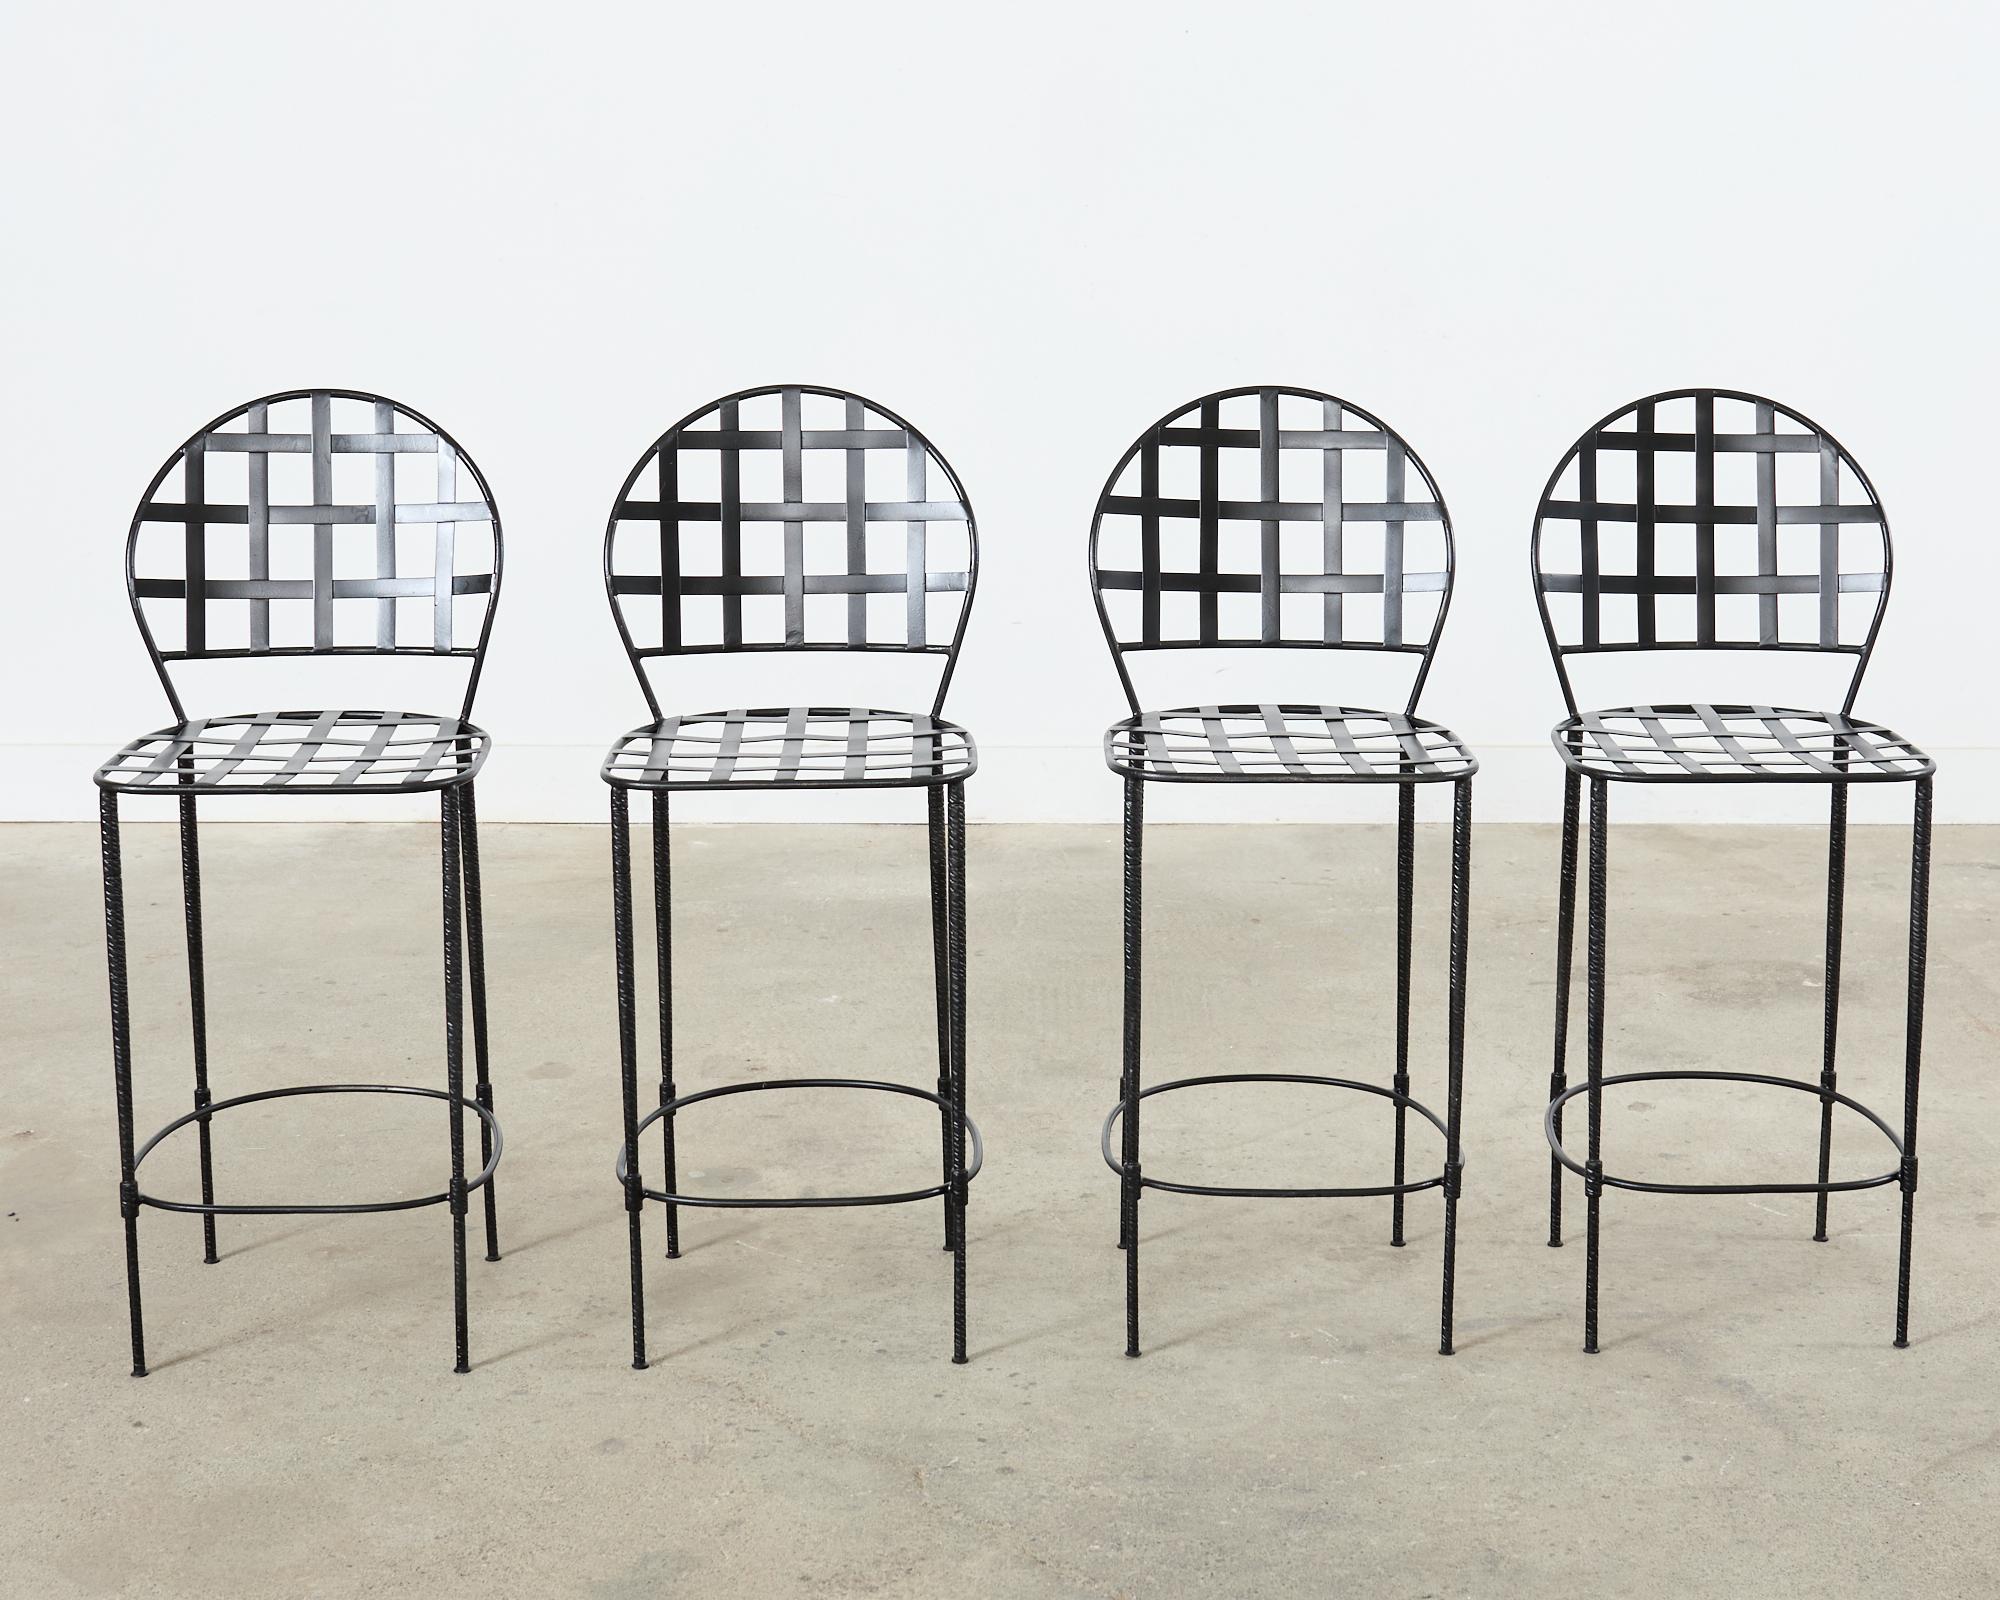 Distinctive set of four iron counter height barstools made in the manner and style of Mario Papperzini for John Salterini mid-century modern designs. The Amalfi stools have an iconic lattice metal strap neoclassical style on the seat and back. The